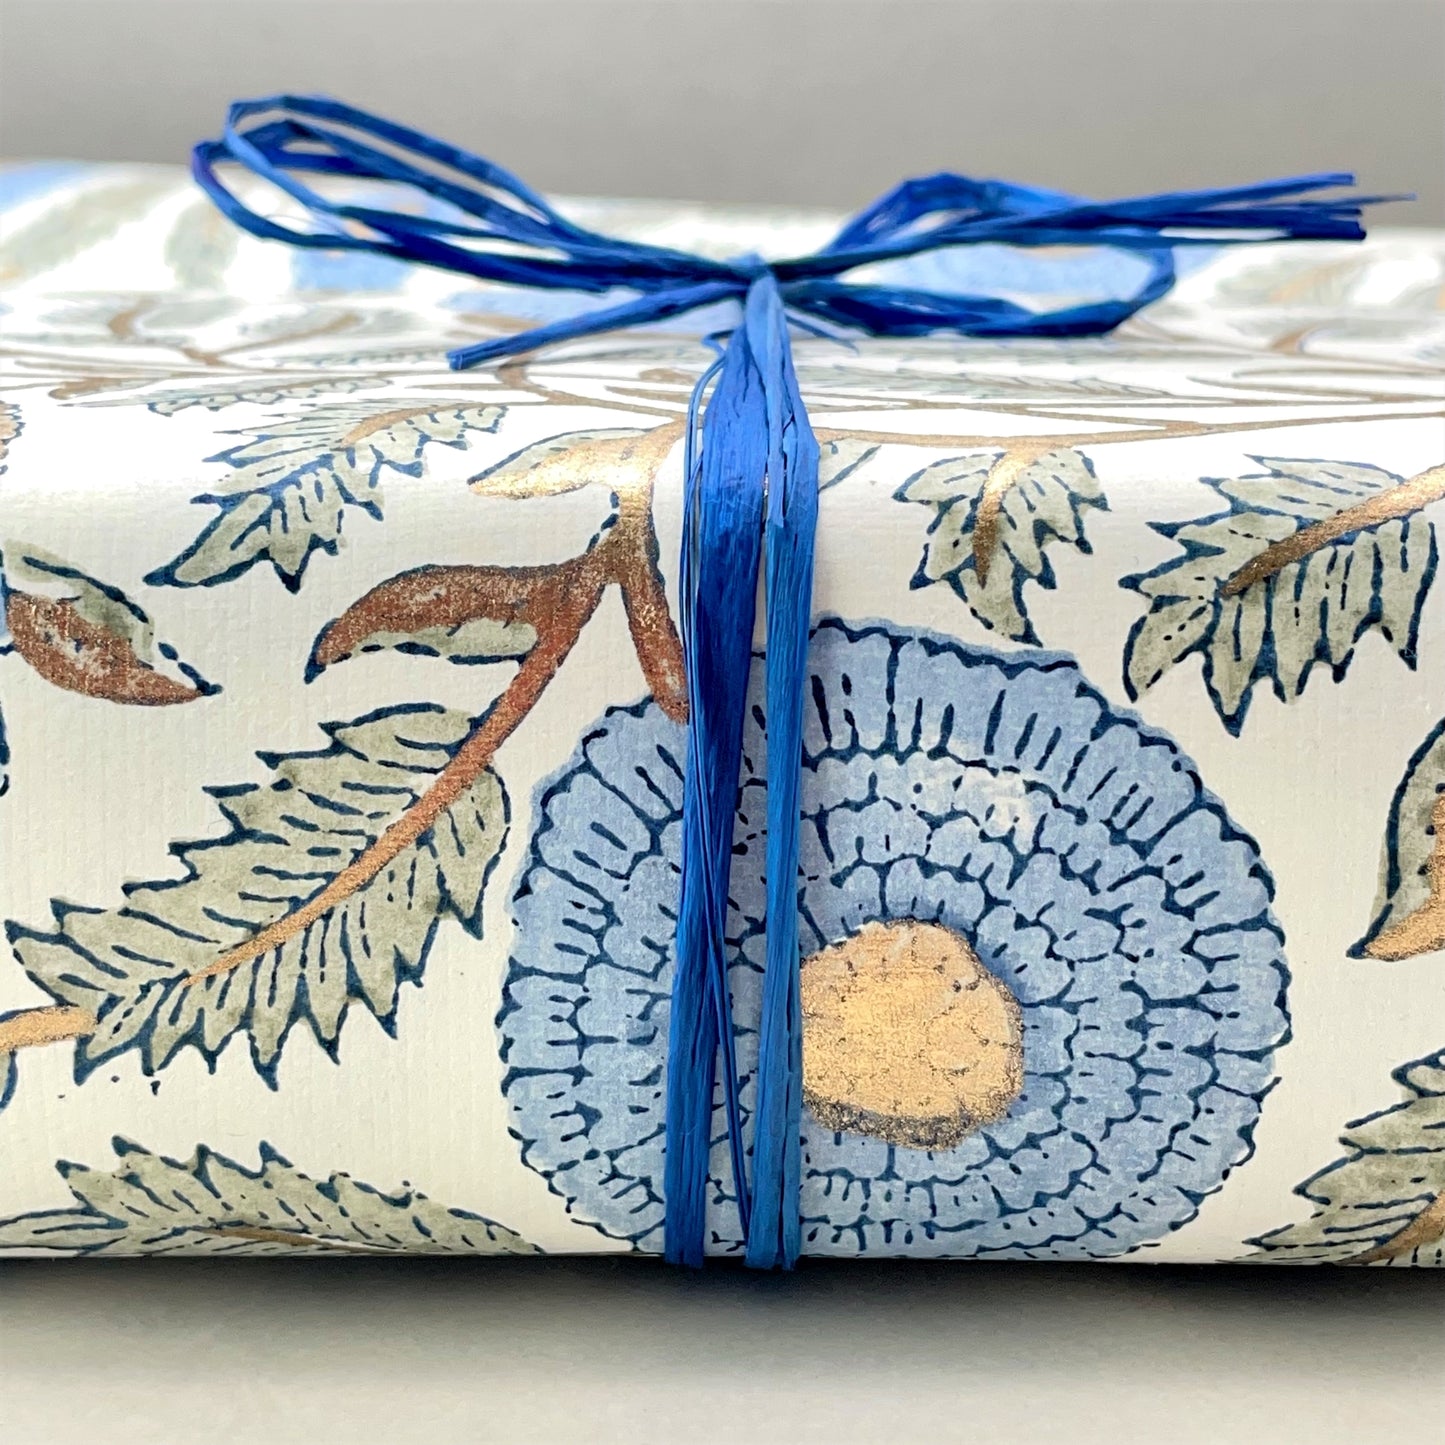 wrapping paper with repeat botanical pattern in blue, gold and green, close-up